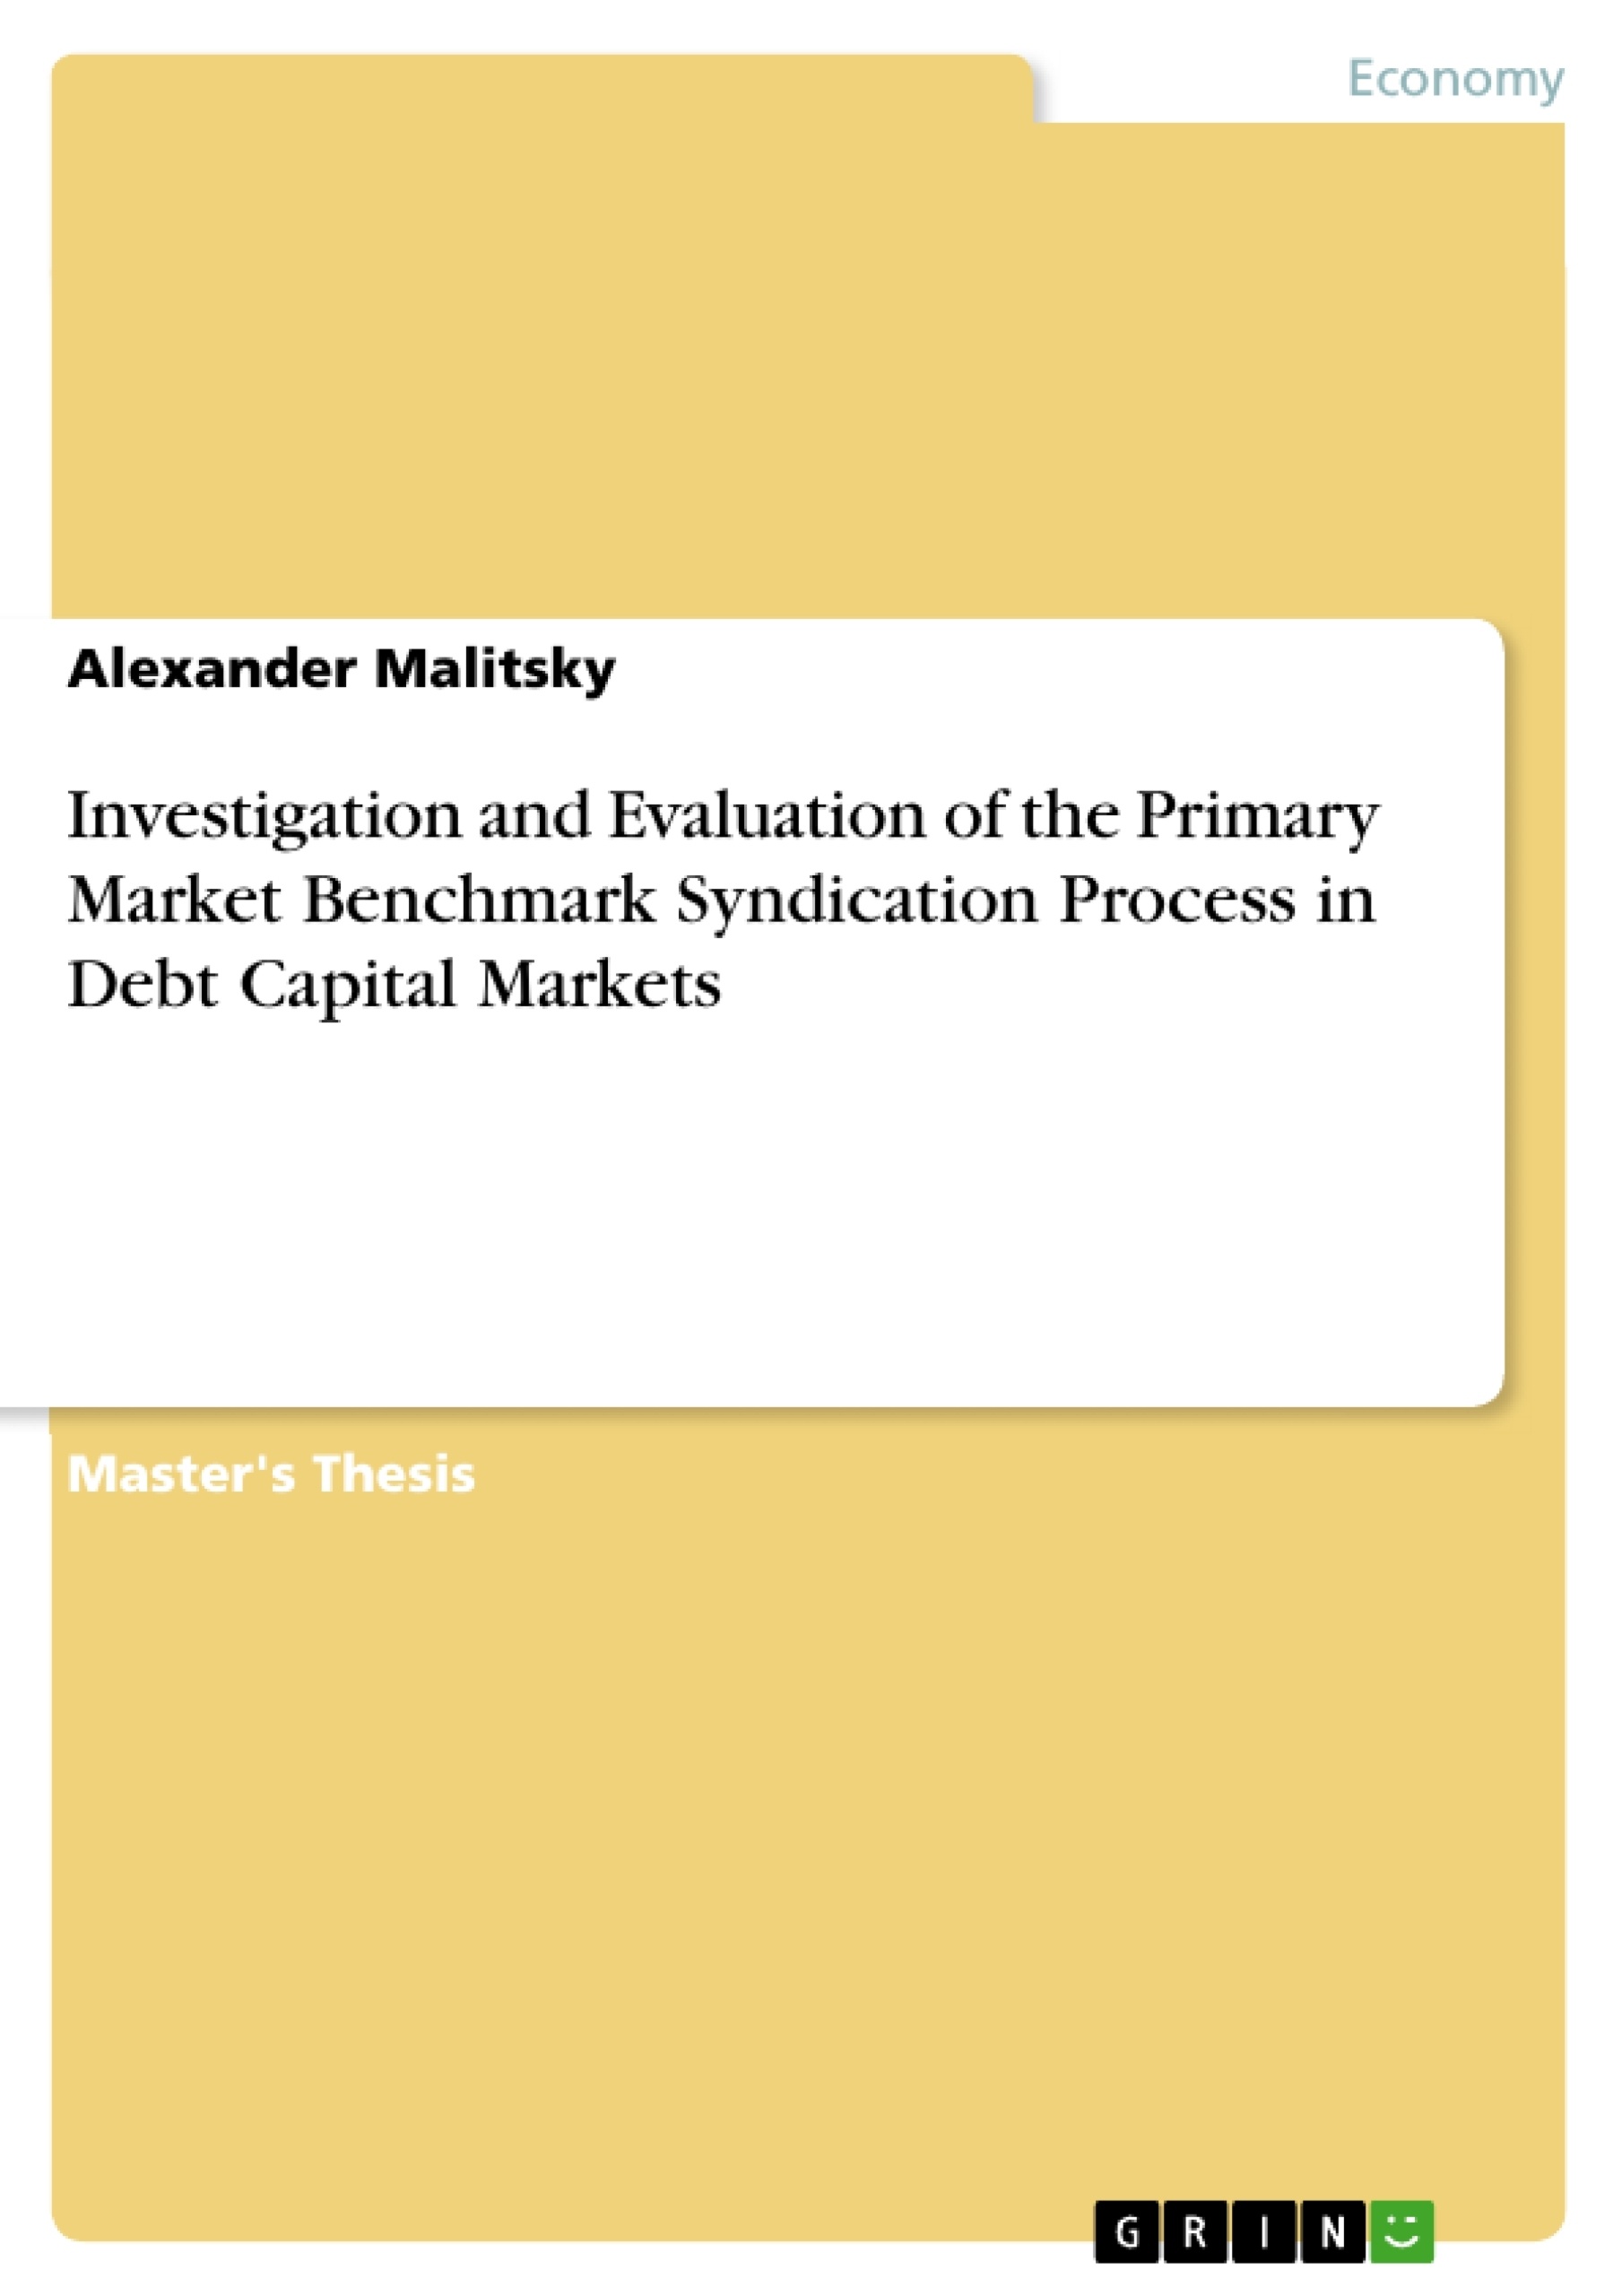 Title: Investigation and Evaluation of the Primary Market Benchmark Syndication Process in Debt Capital Markets